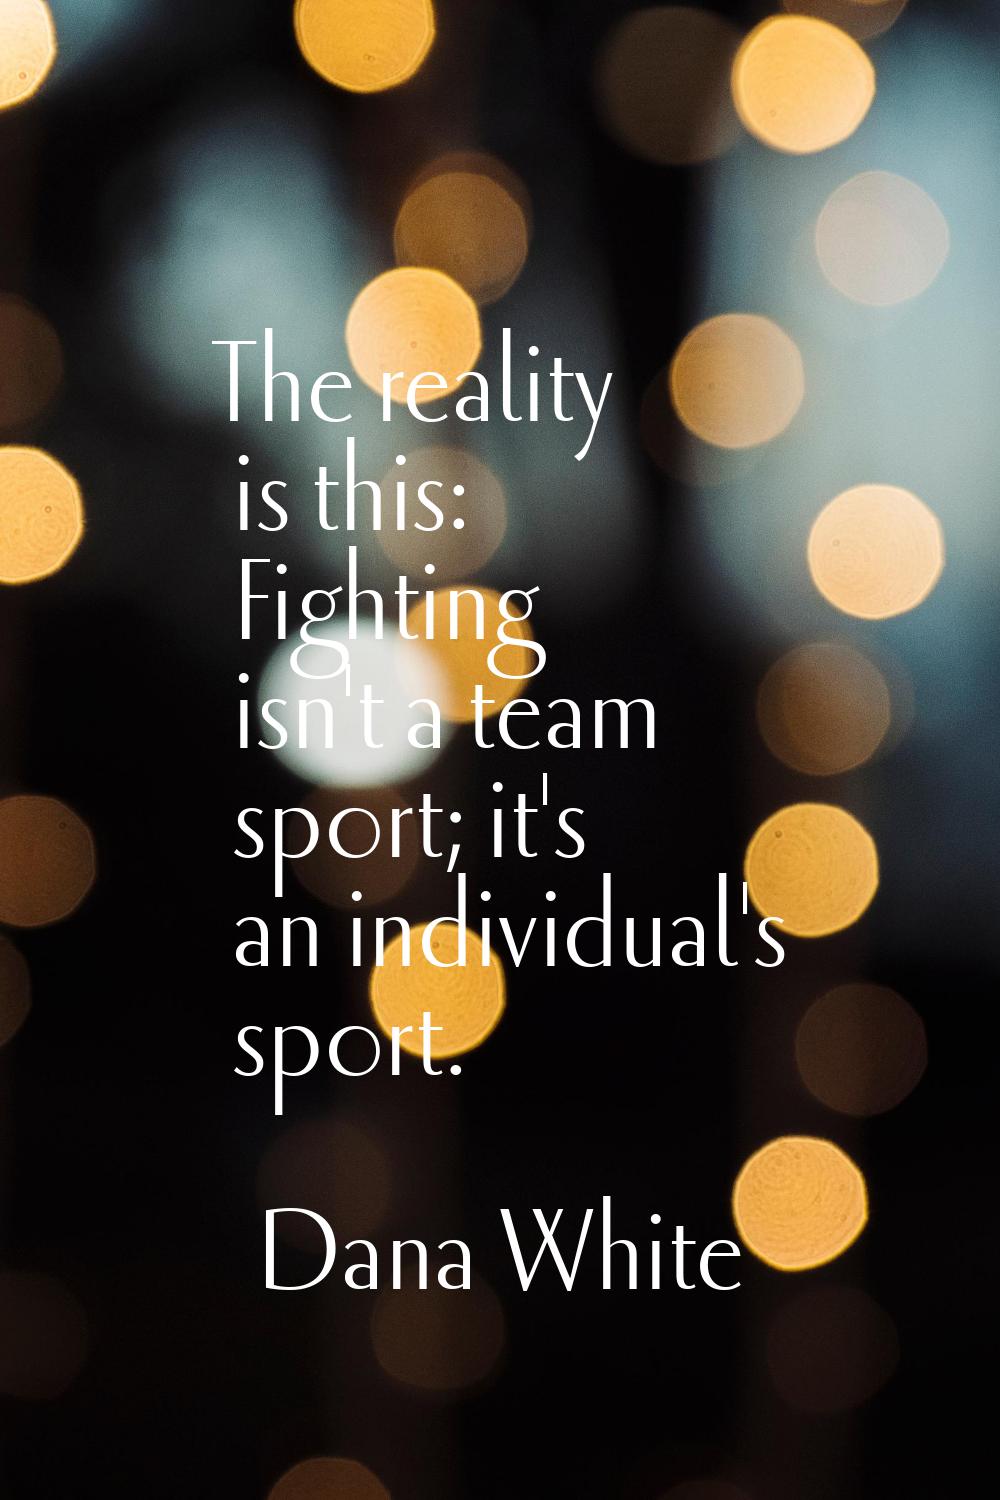 The reality is this: Fighting isn't a team sport; it's an individual's sport.